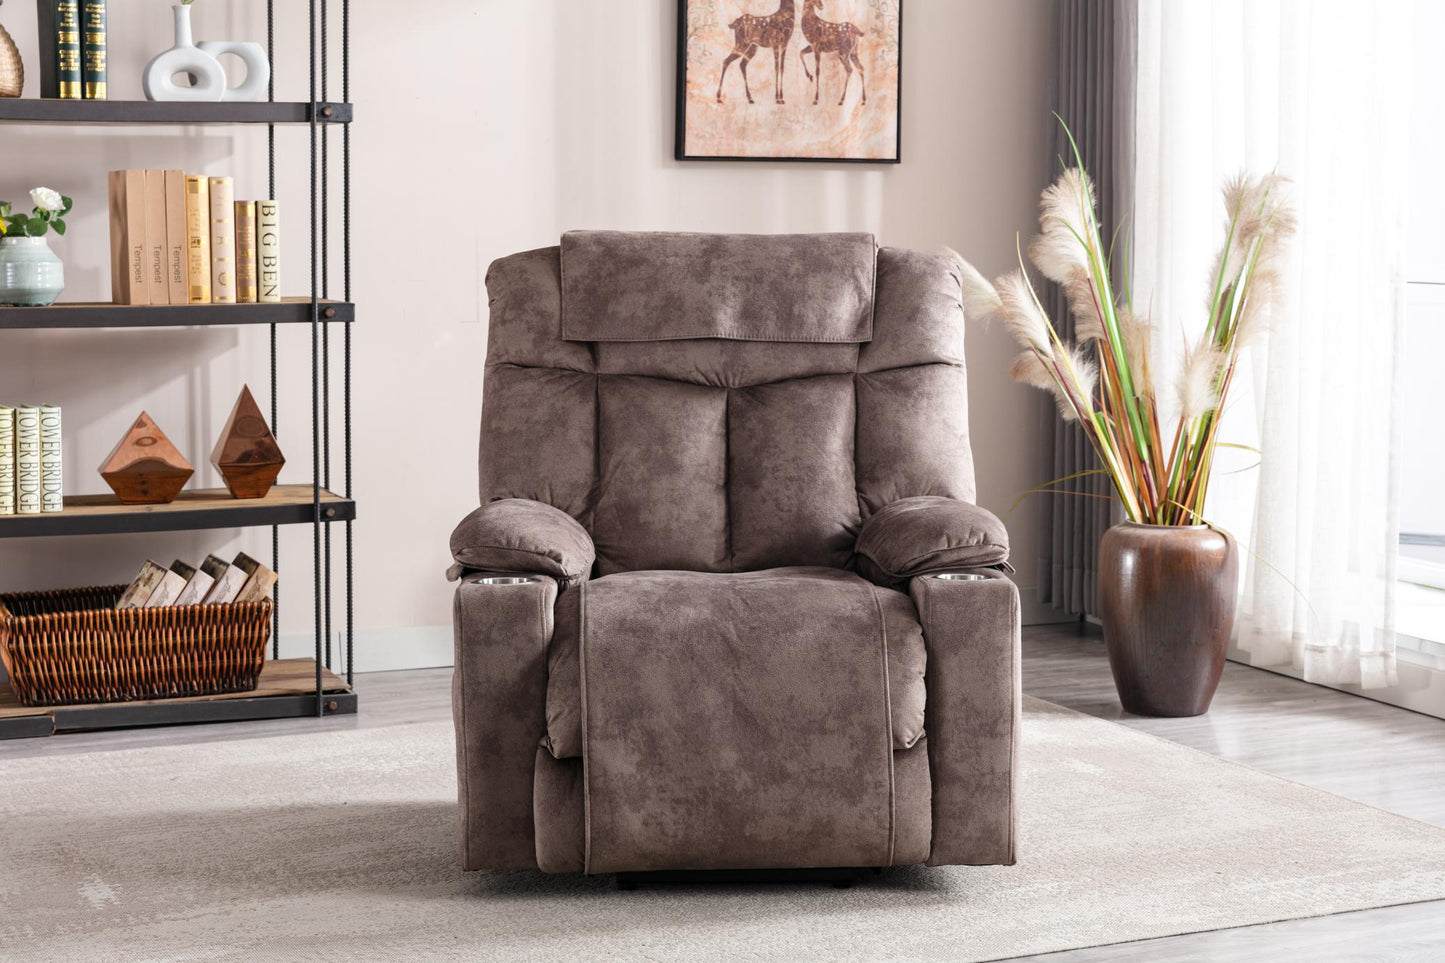 Electric lift recliner,suitable for the elderly